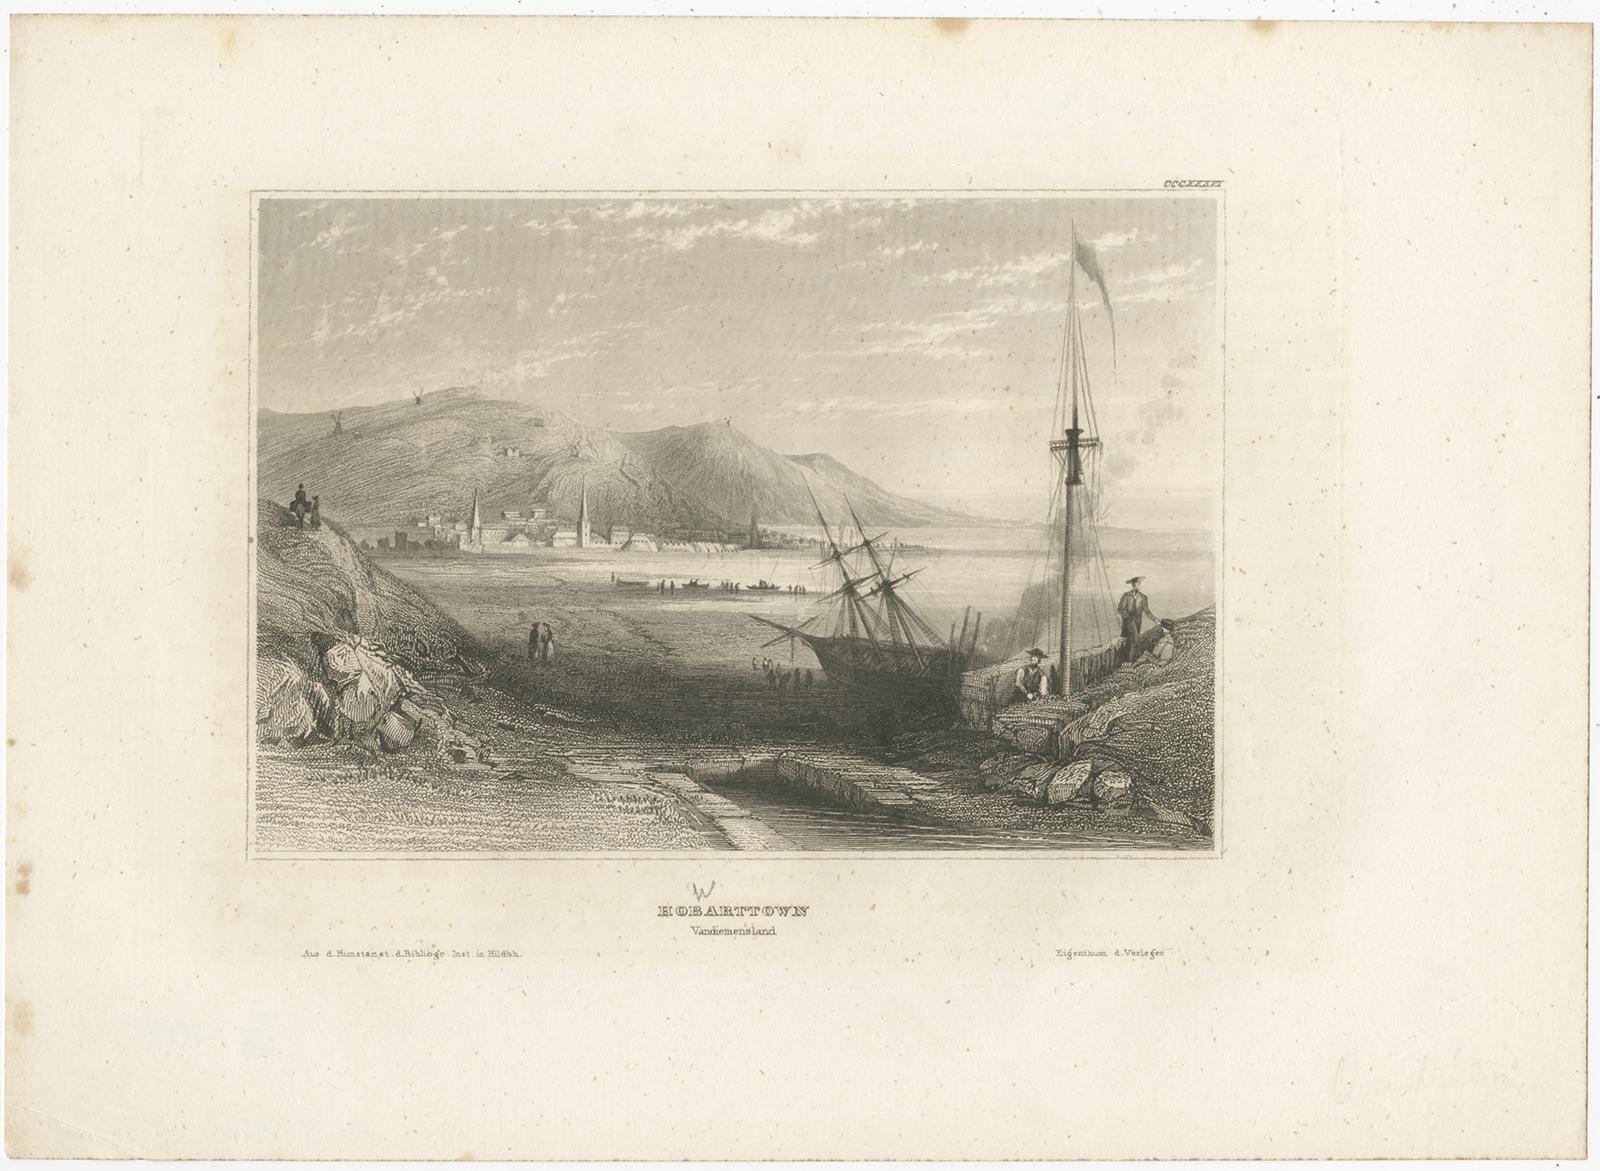 Antique print titled 'Hobarttown Vandiemensland'. View of Hobart, located in Tasmania's south-east on the estuary of the River Derwent, making it the most southern of Australia's capital cities. Originates from 'Meyers Universum'. Published circa